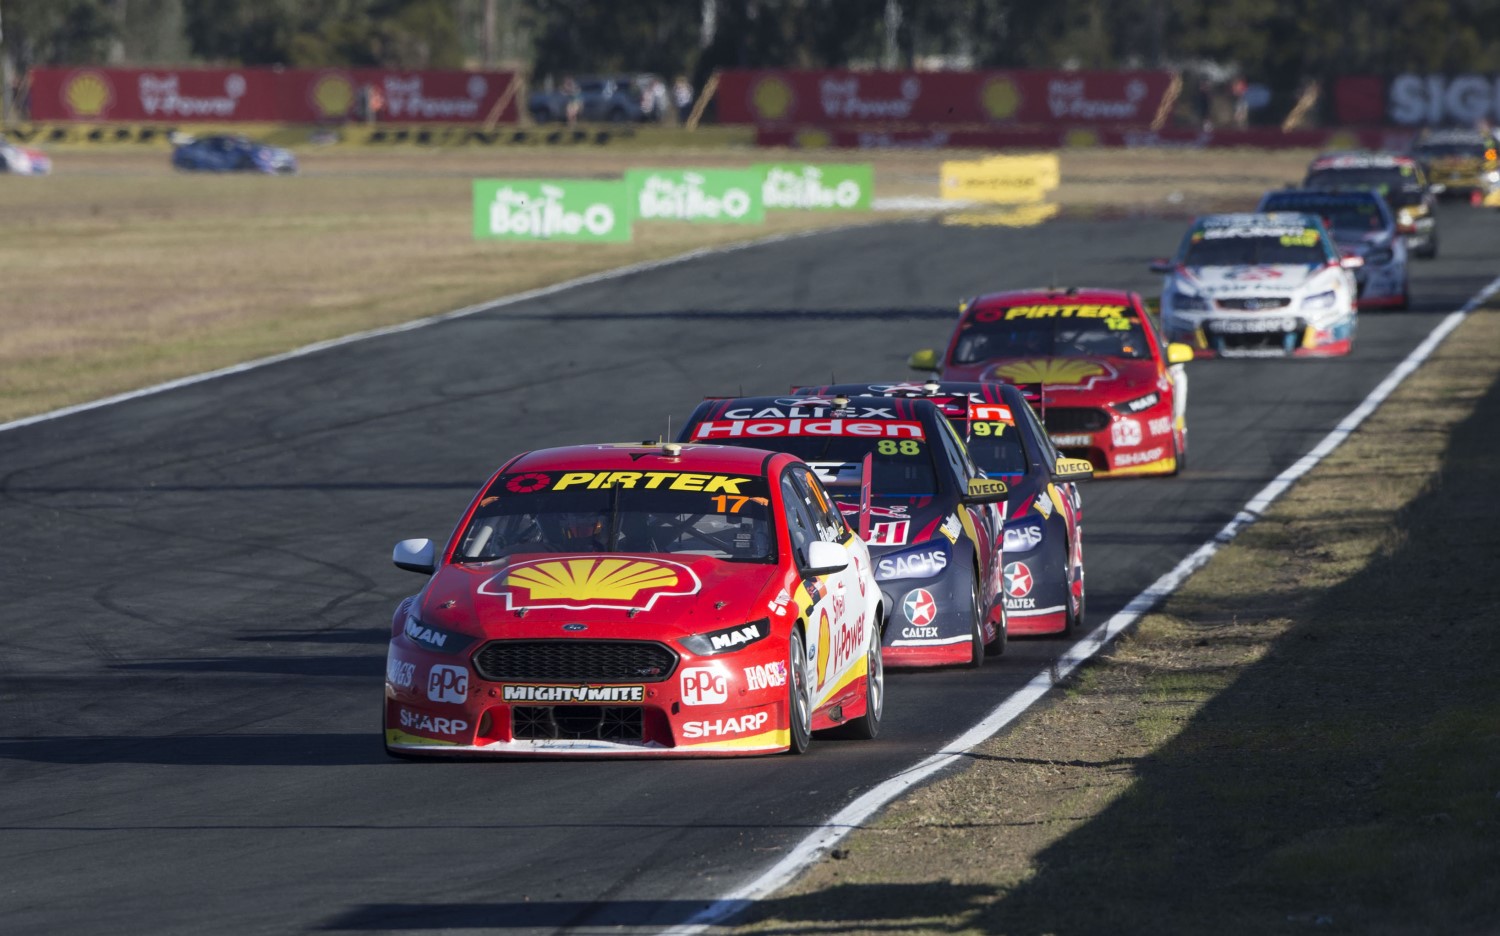 2nd place finisher McLaughlin leads train of Whincup, van Gisbergen and Coulthard